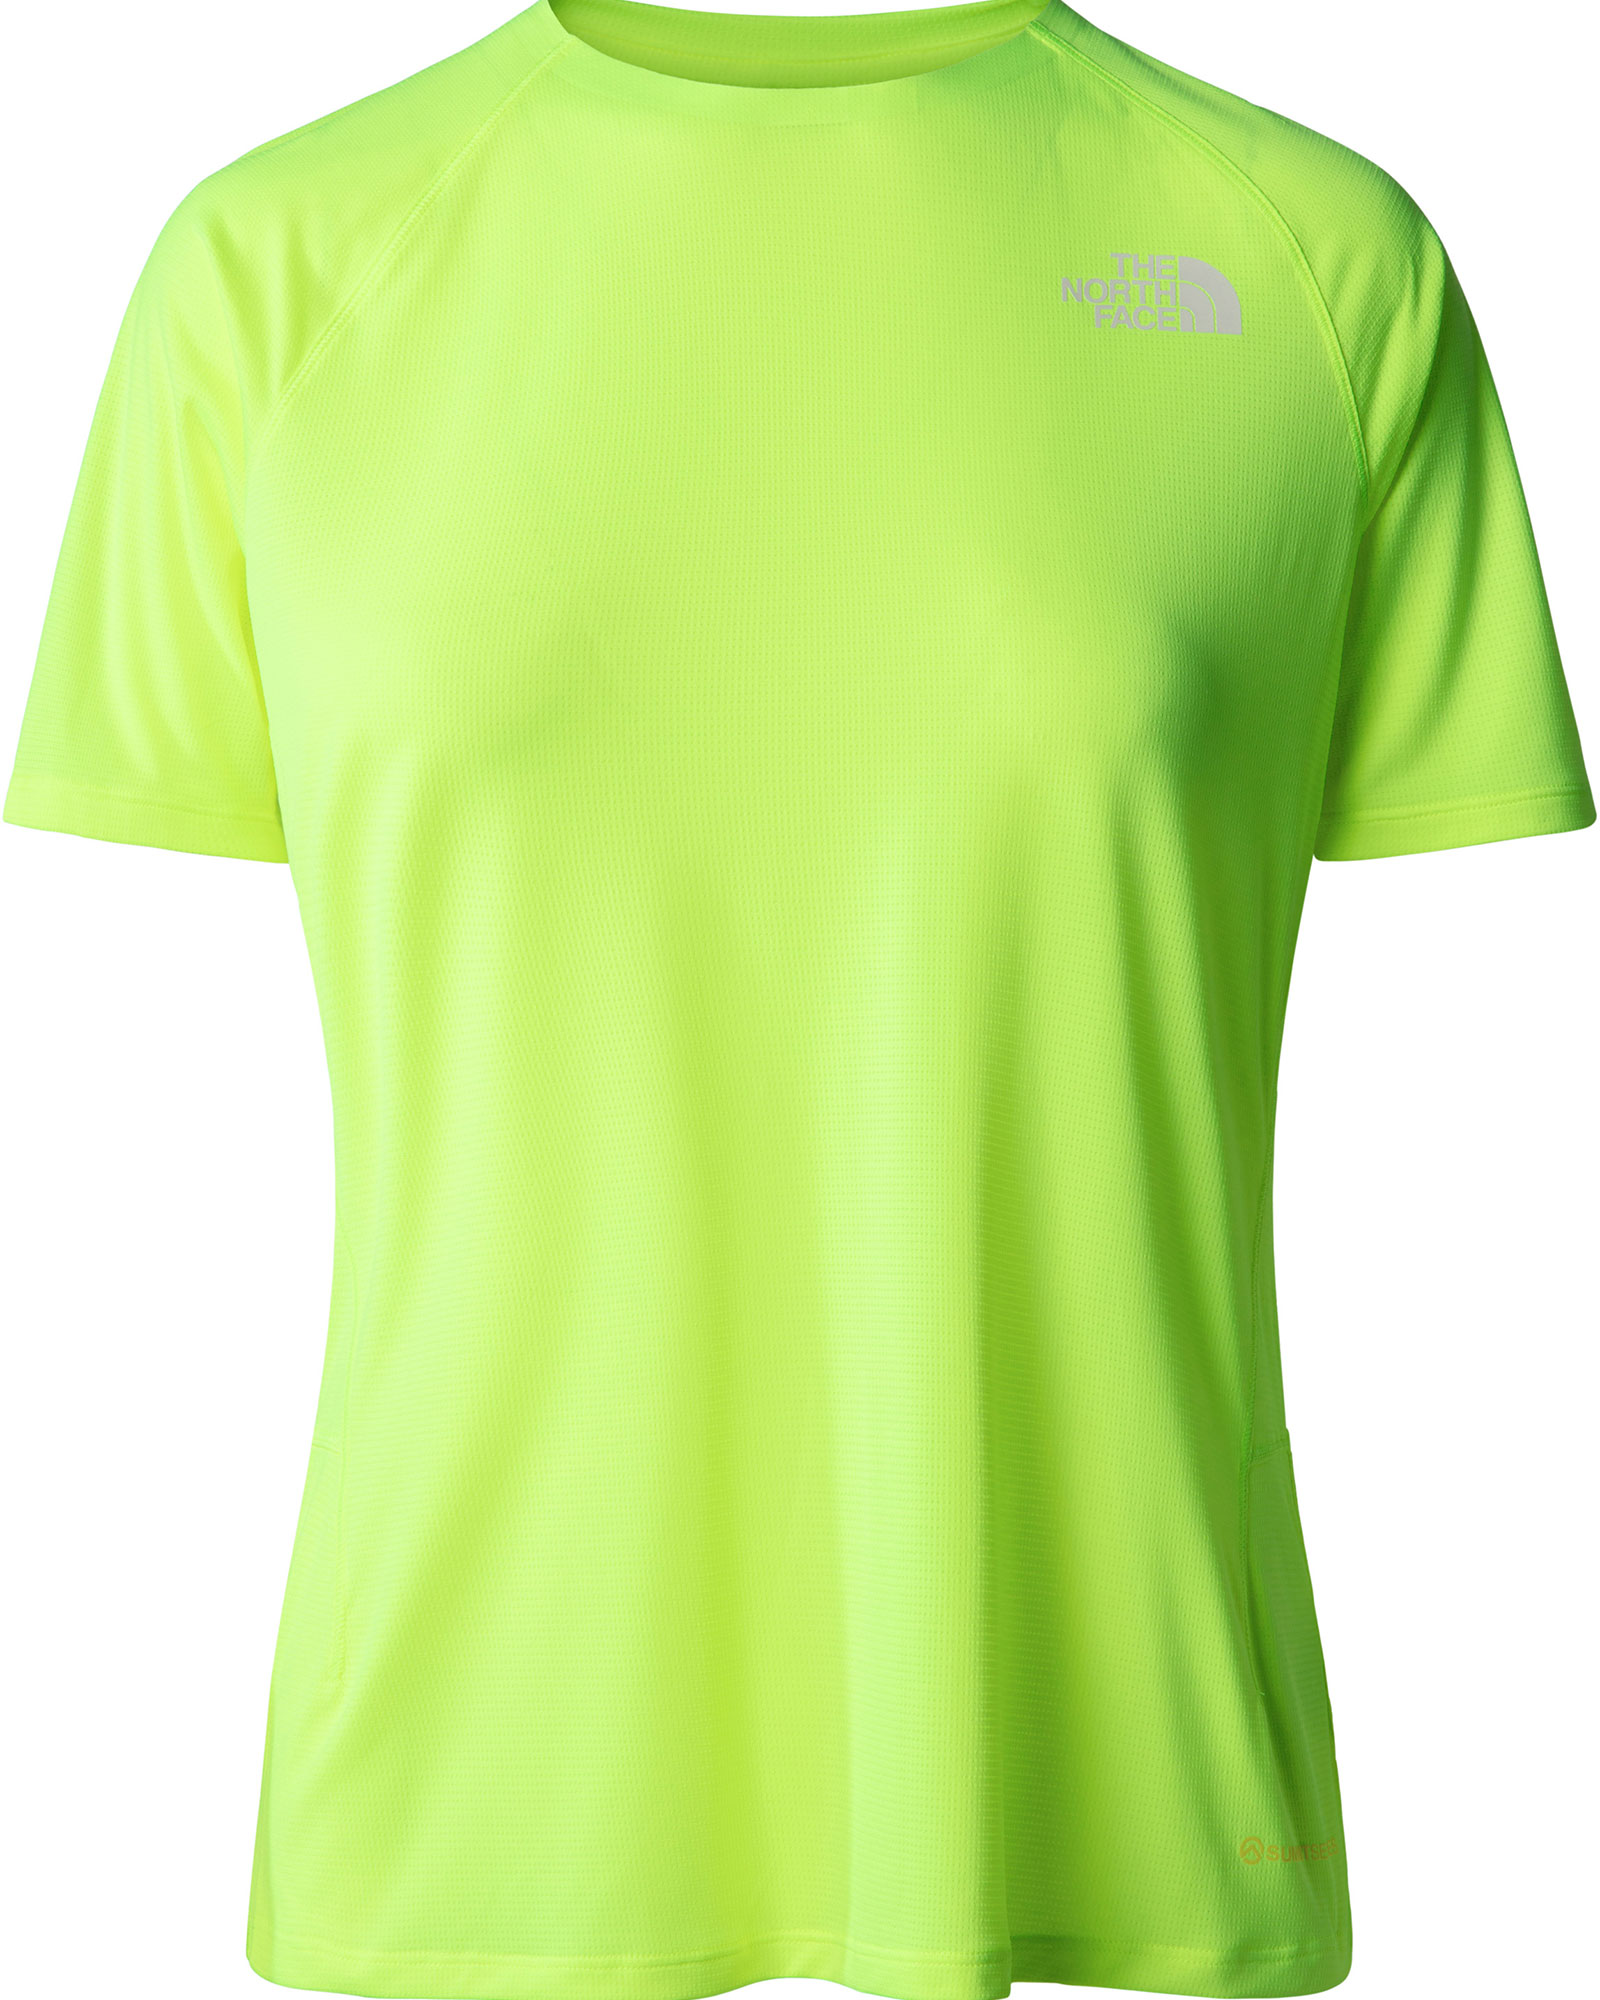 The North Face Women’s Summit High Trail T Shirt - LED Yellow XS